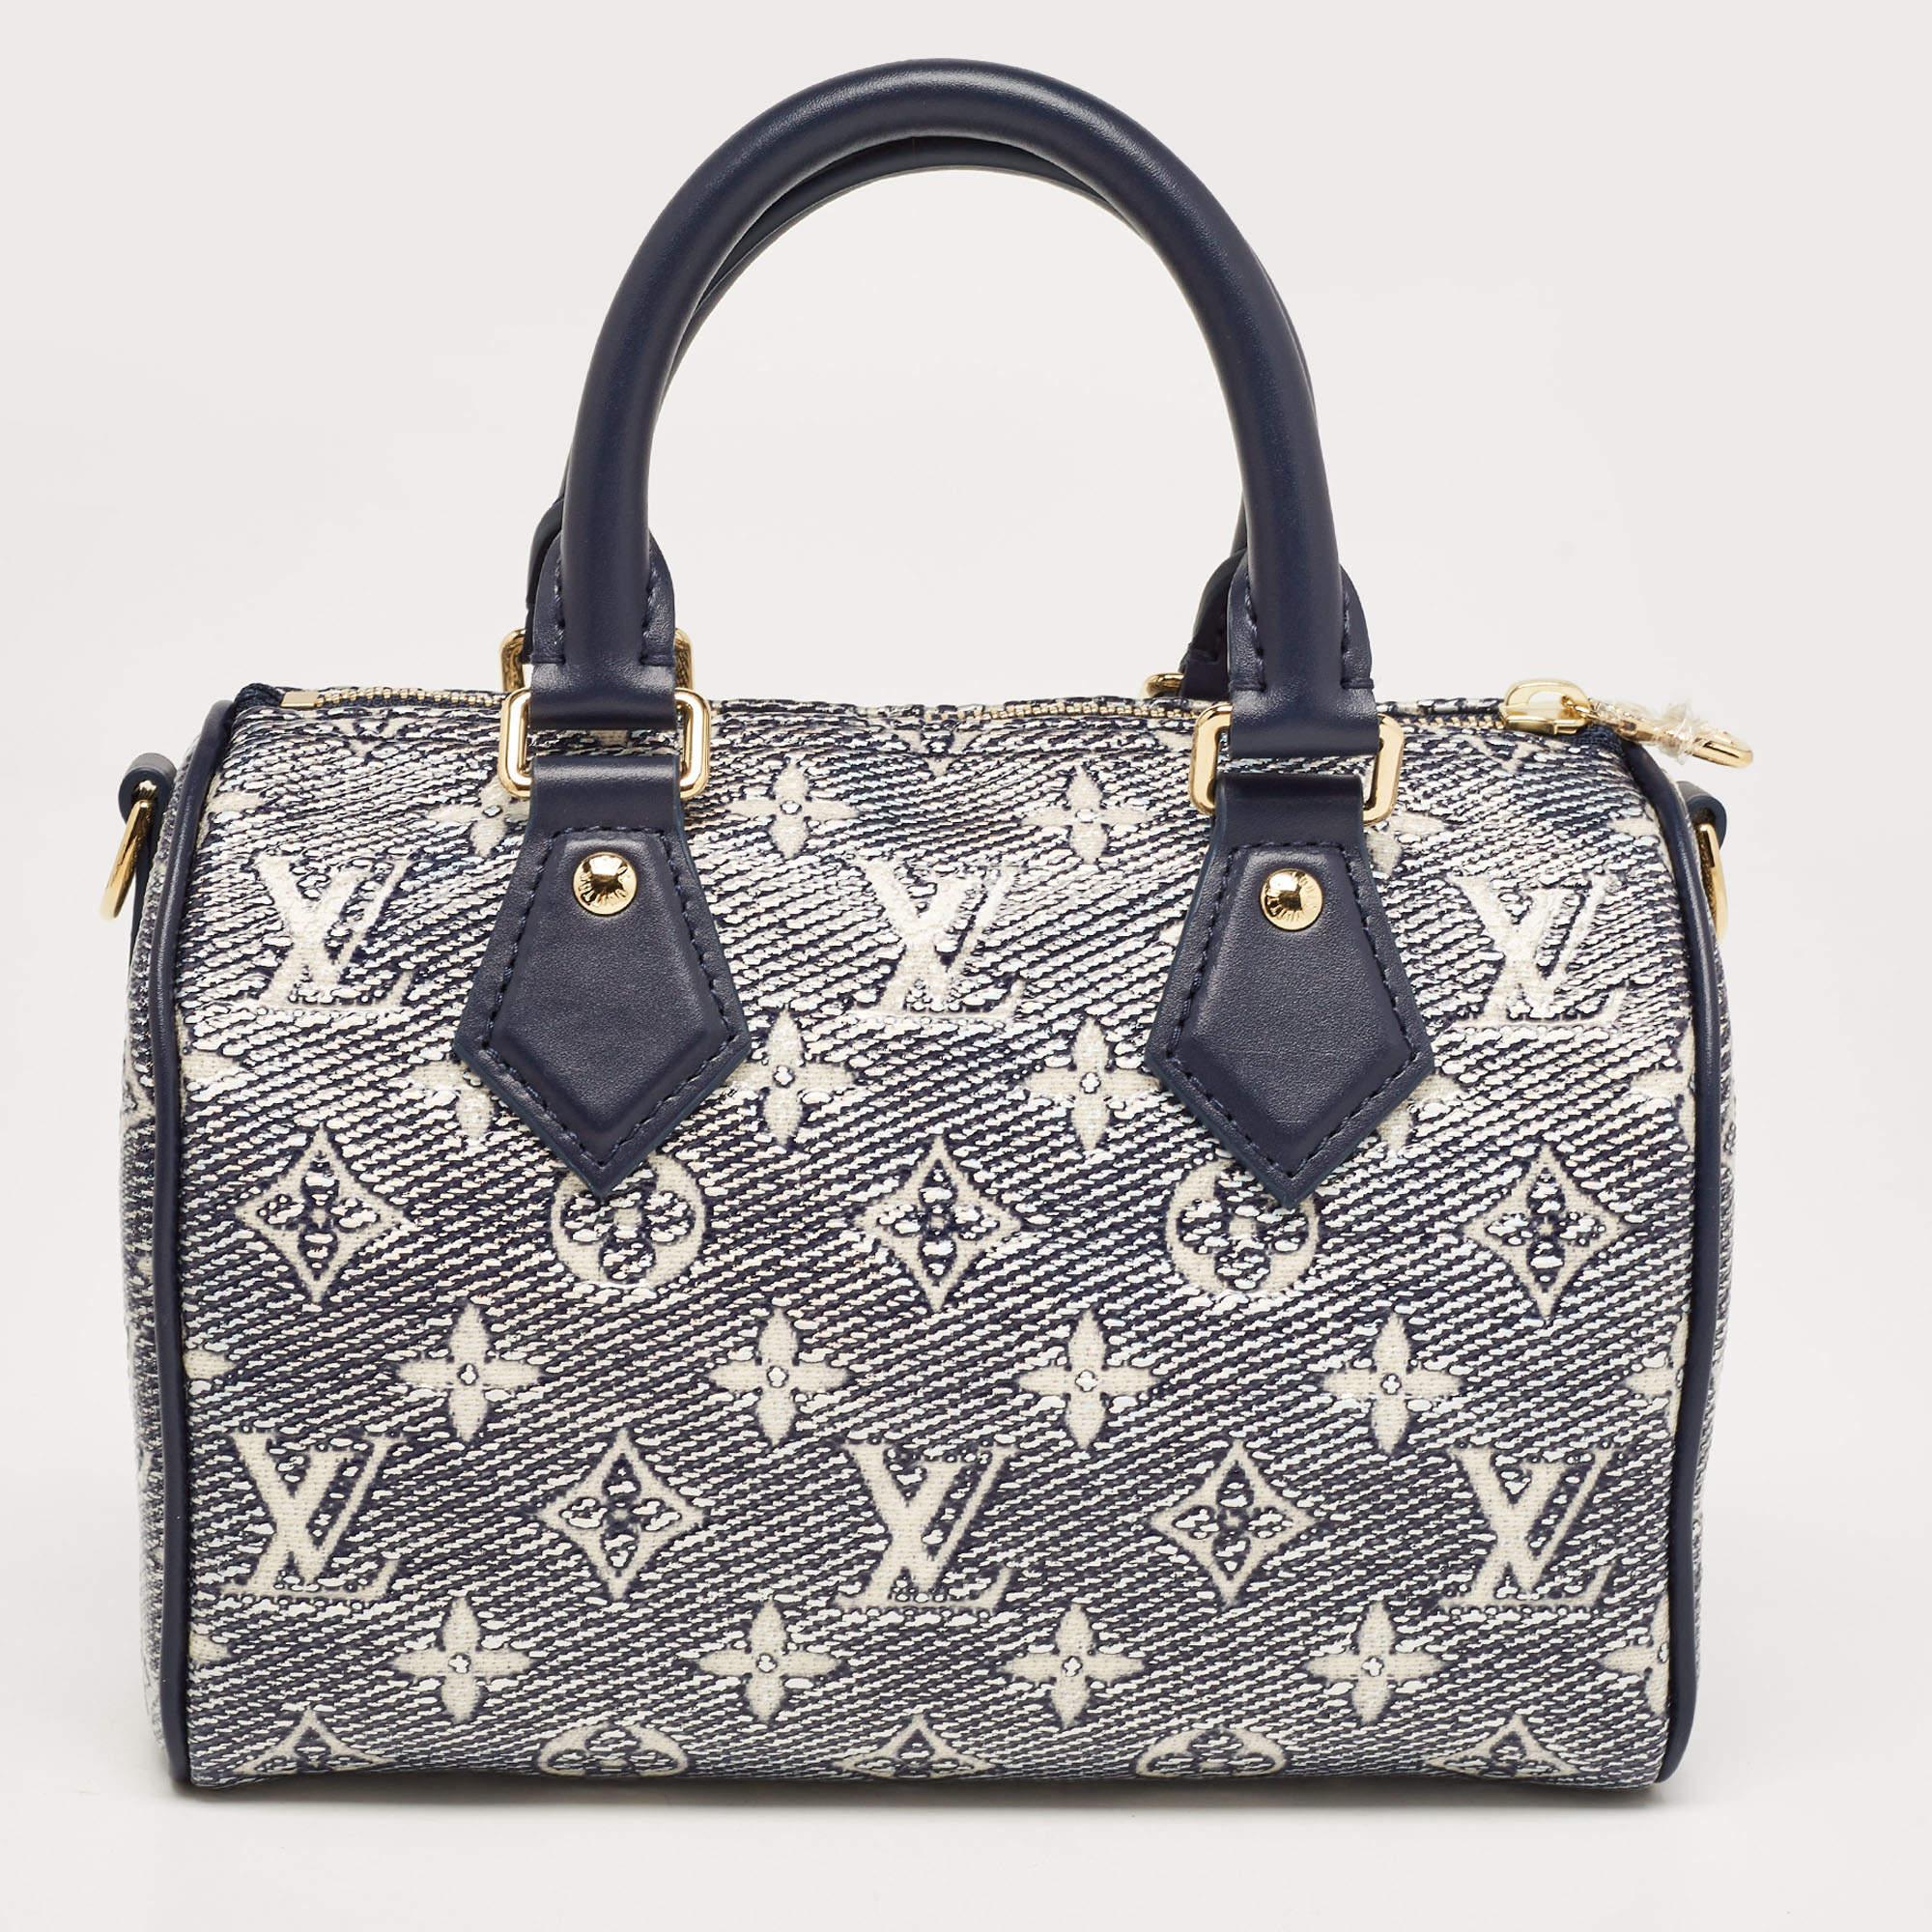 A classic handbag comes with the promise of enduring appeal, boosting your style time and again. This Louis Vuitton Speedy Bandouliere 20 is one such creation. It’s a fine purchase.

Includes: Detachable Strap, Original Dustbag, Original Box